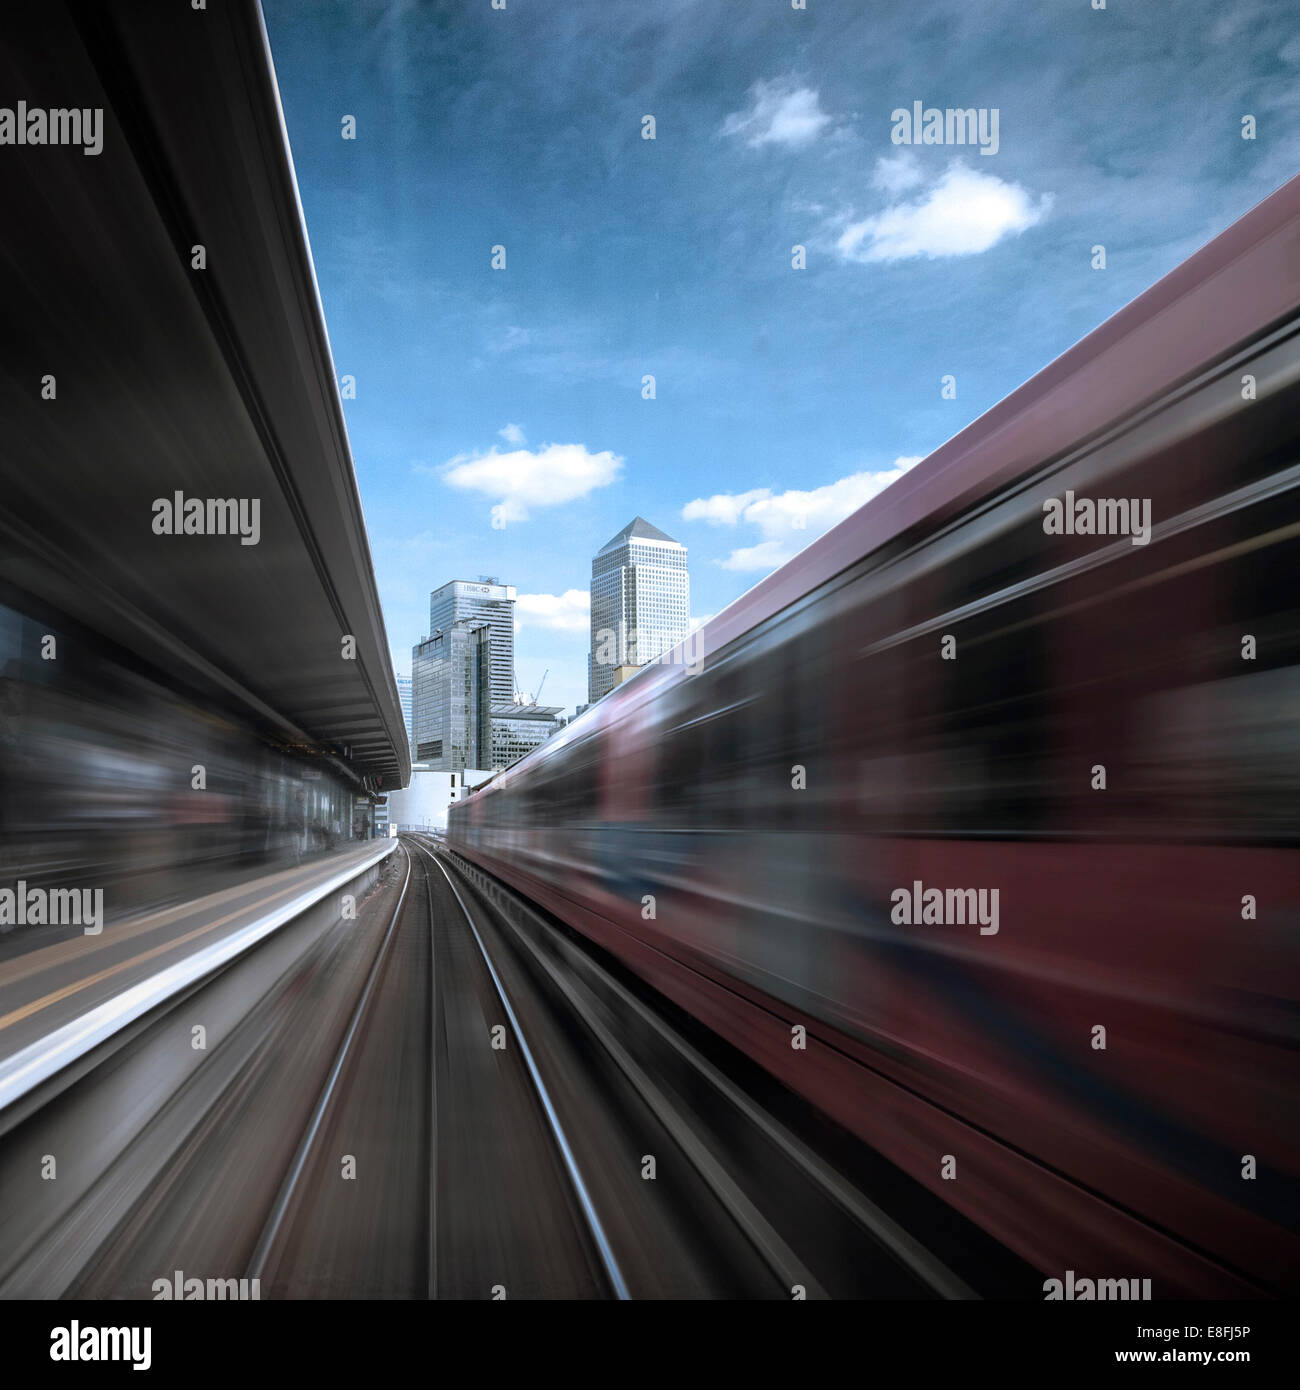 UK, England, London, Canary Wharf, View from going train Stock Photo